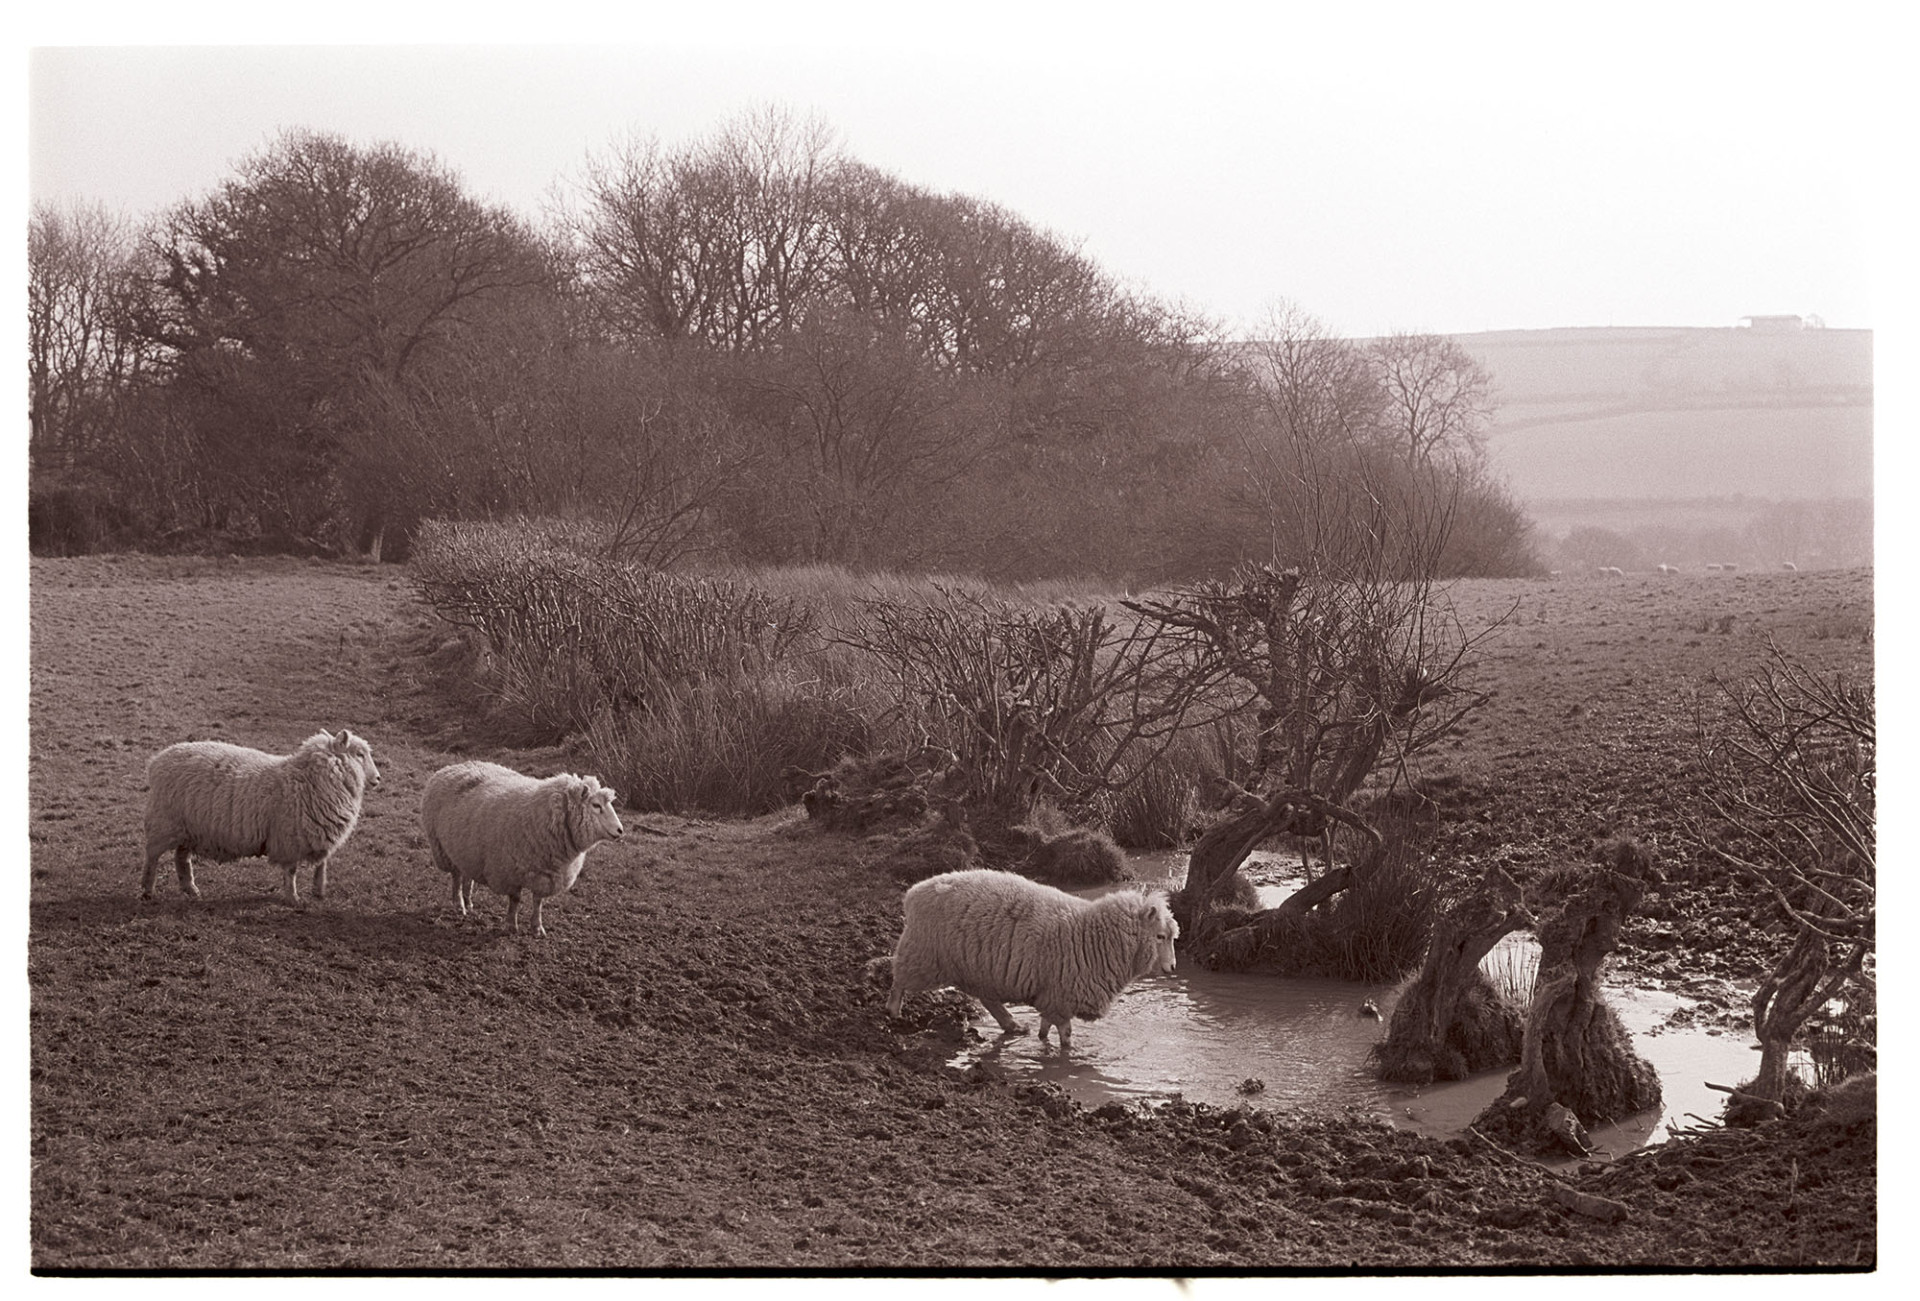 Sheep moving through broken hedge in muddy wet field. 
[Sheep wading through a muddy pool of water by a broken hedge to get to the adjacent field at Pewson, Upcott.]